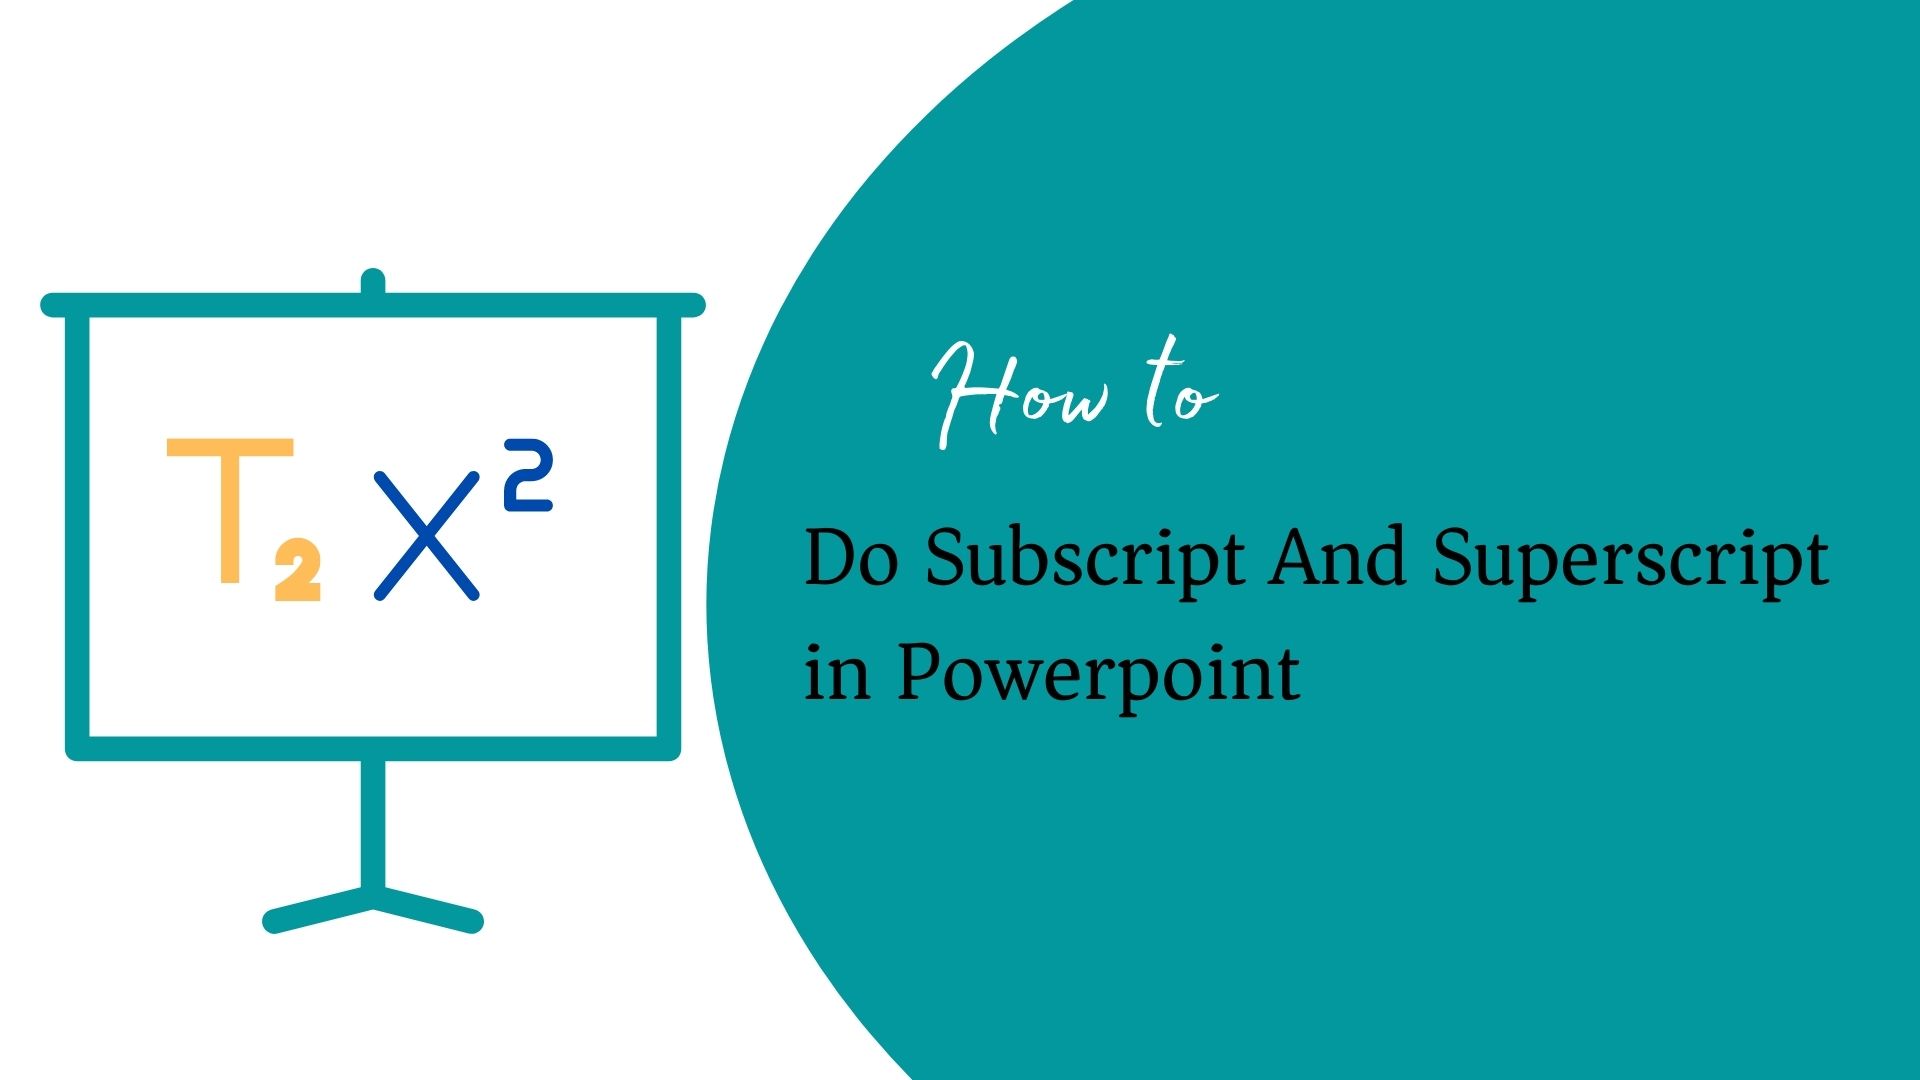 How To Do Subscript And Superscript in Powerpoint